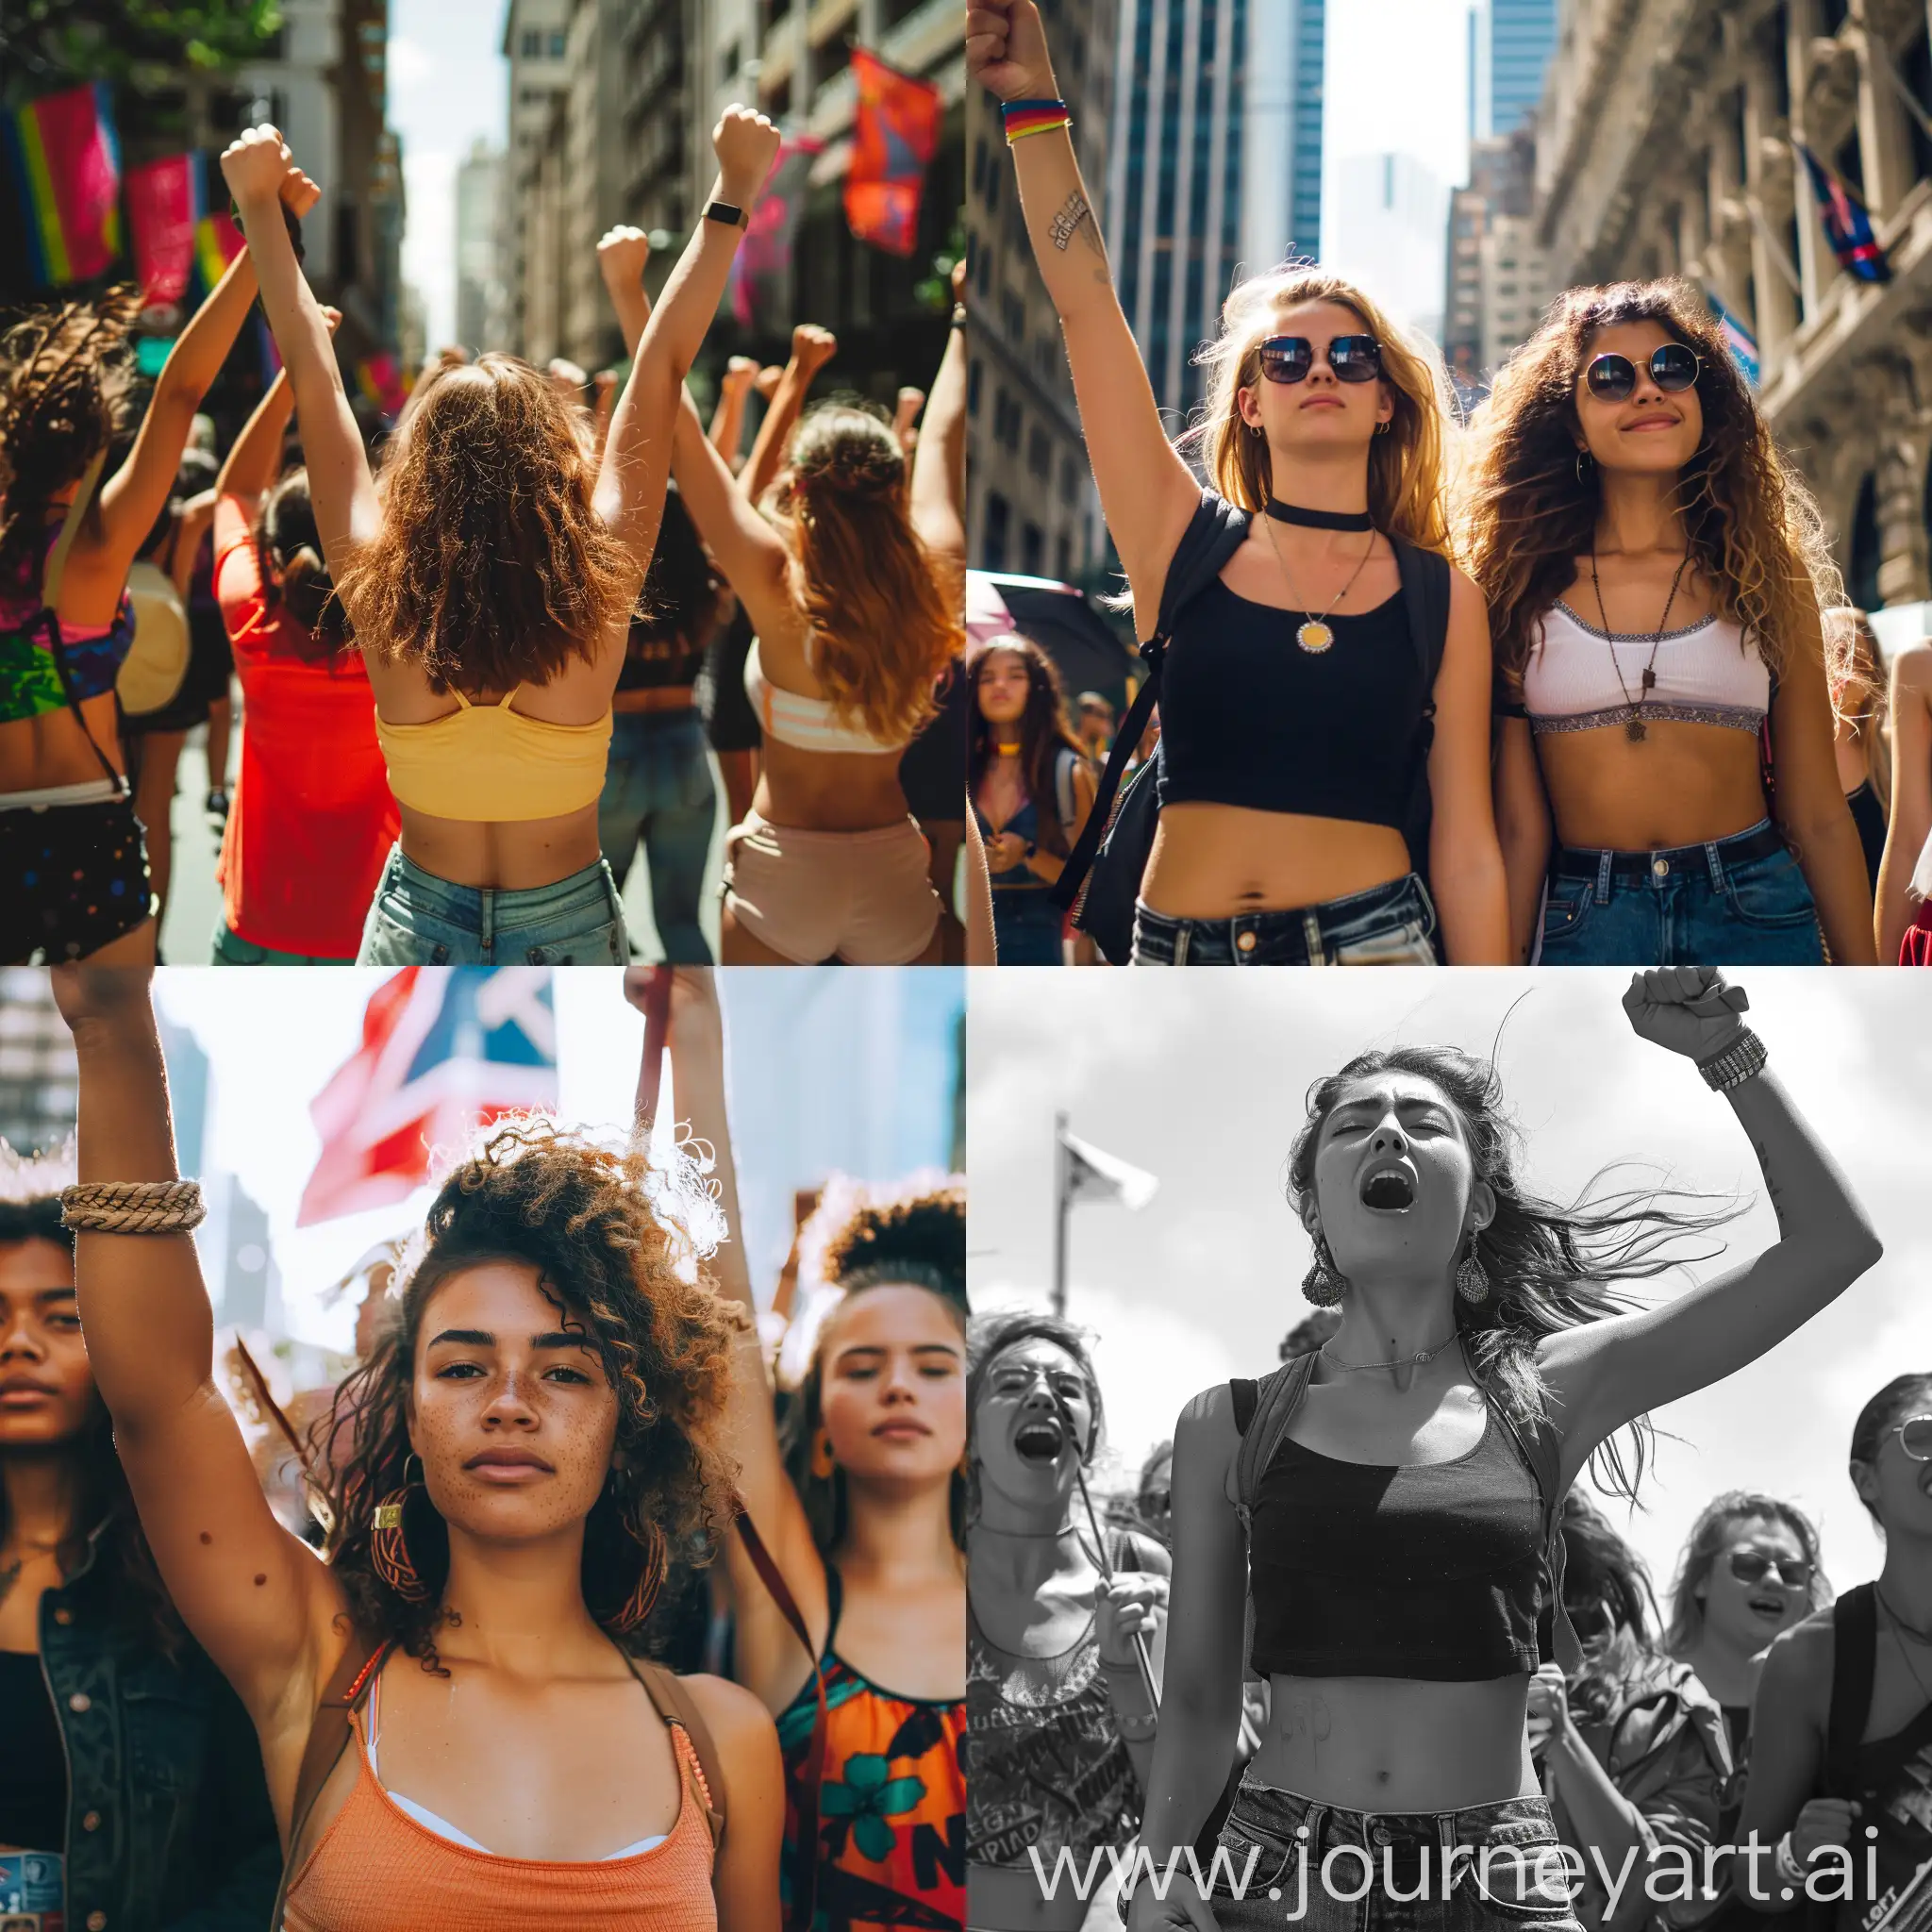 Empowered Girls in crop-tops Protesting for Freedom 